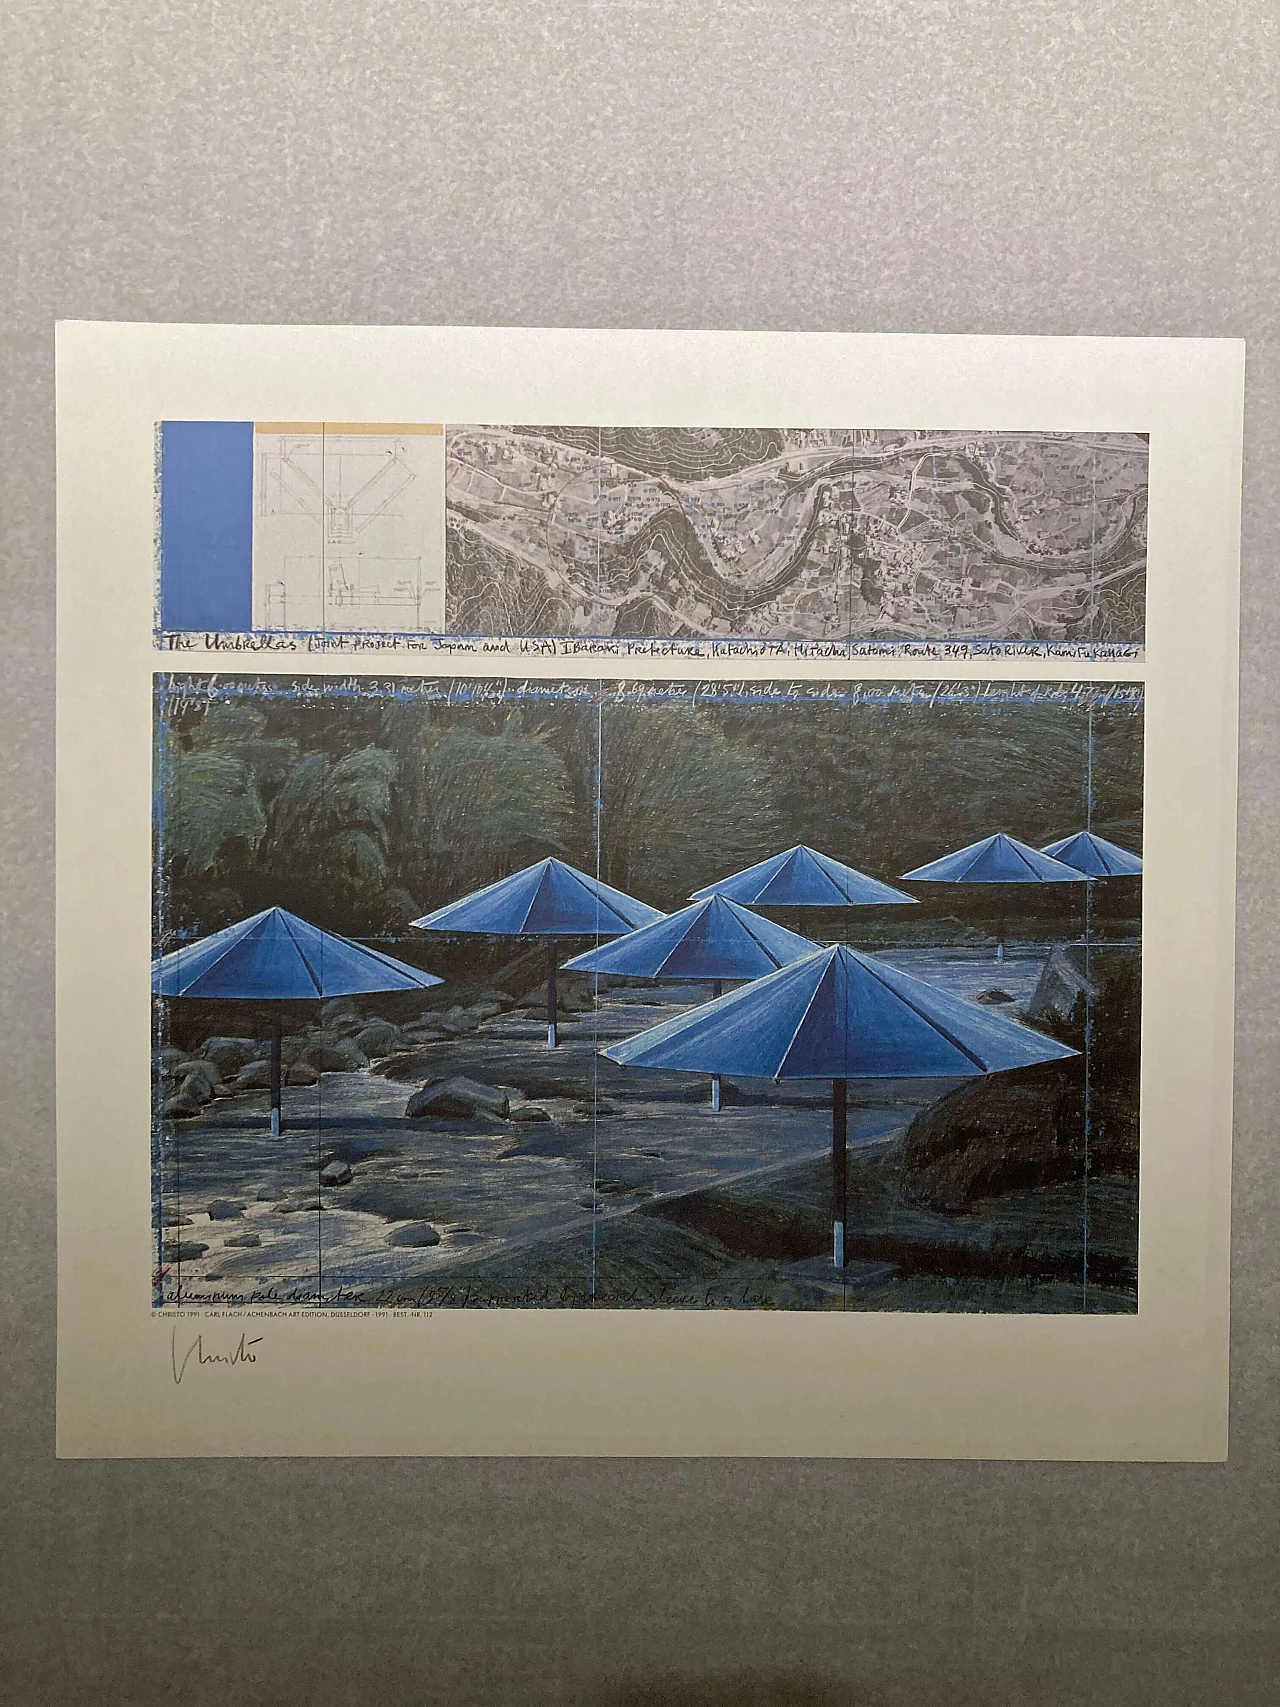 Christo, The Umbrellas - Joint Project for Japan and USA, litografia, 1991 4